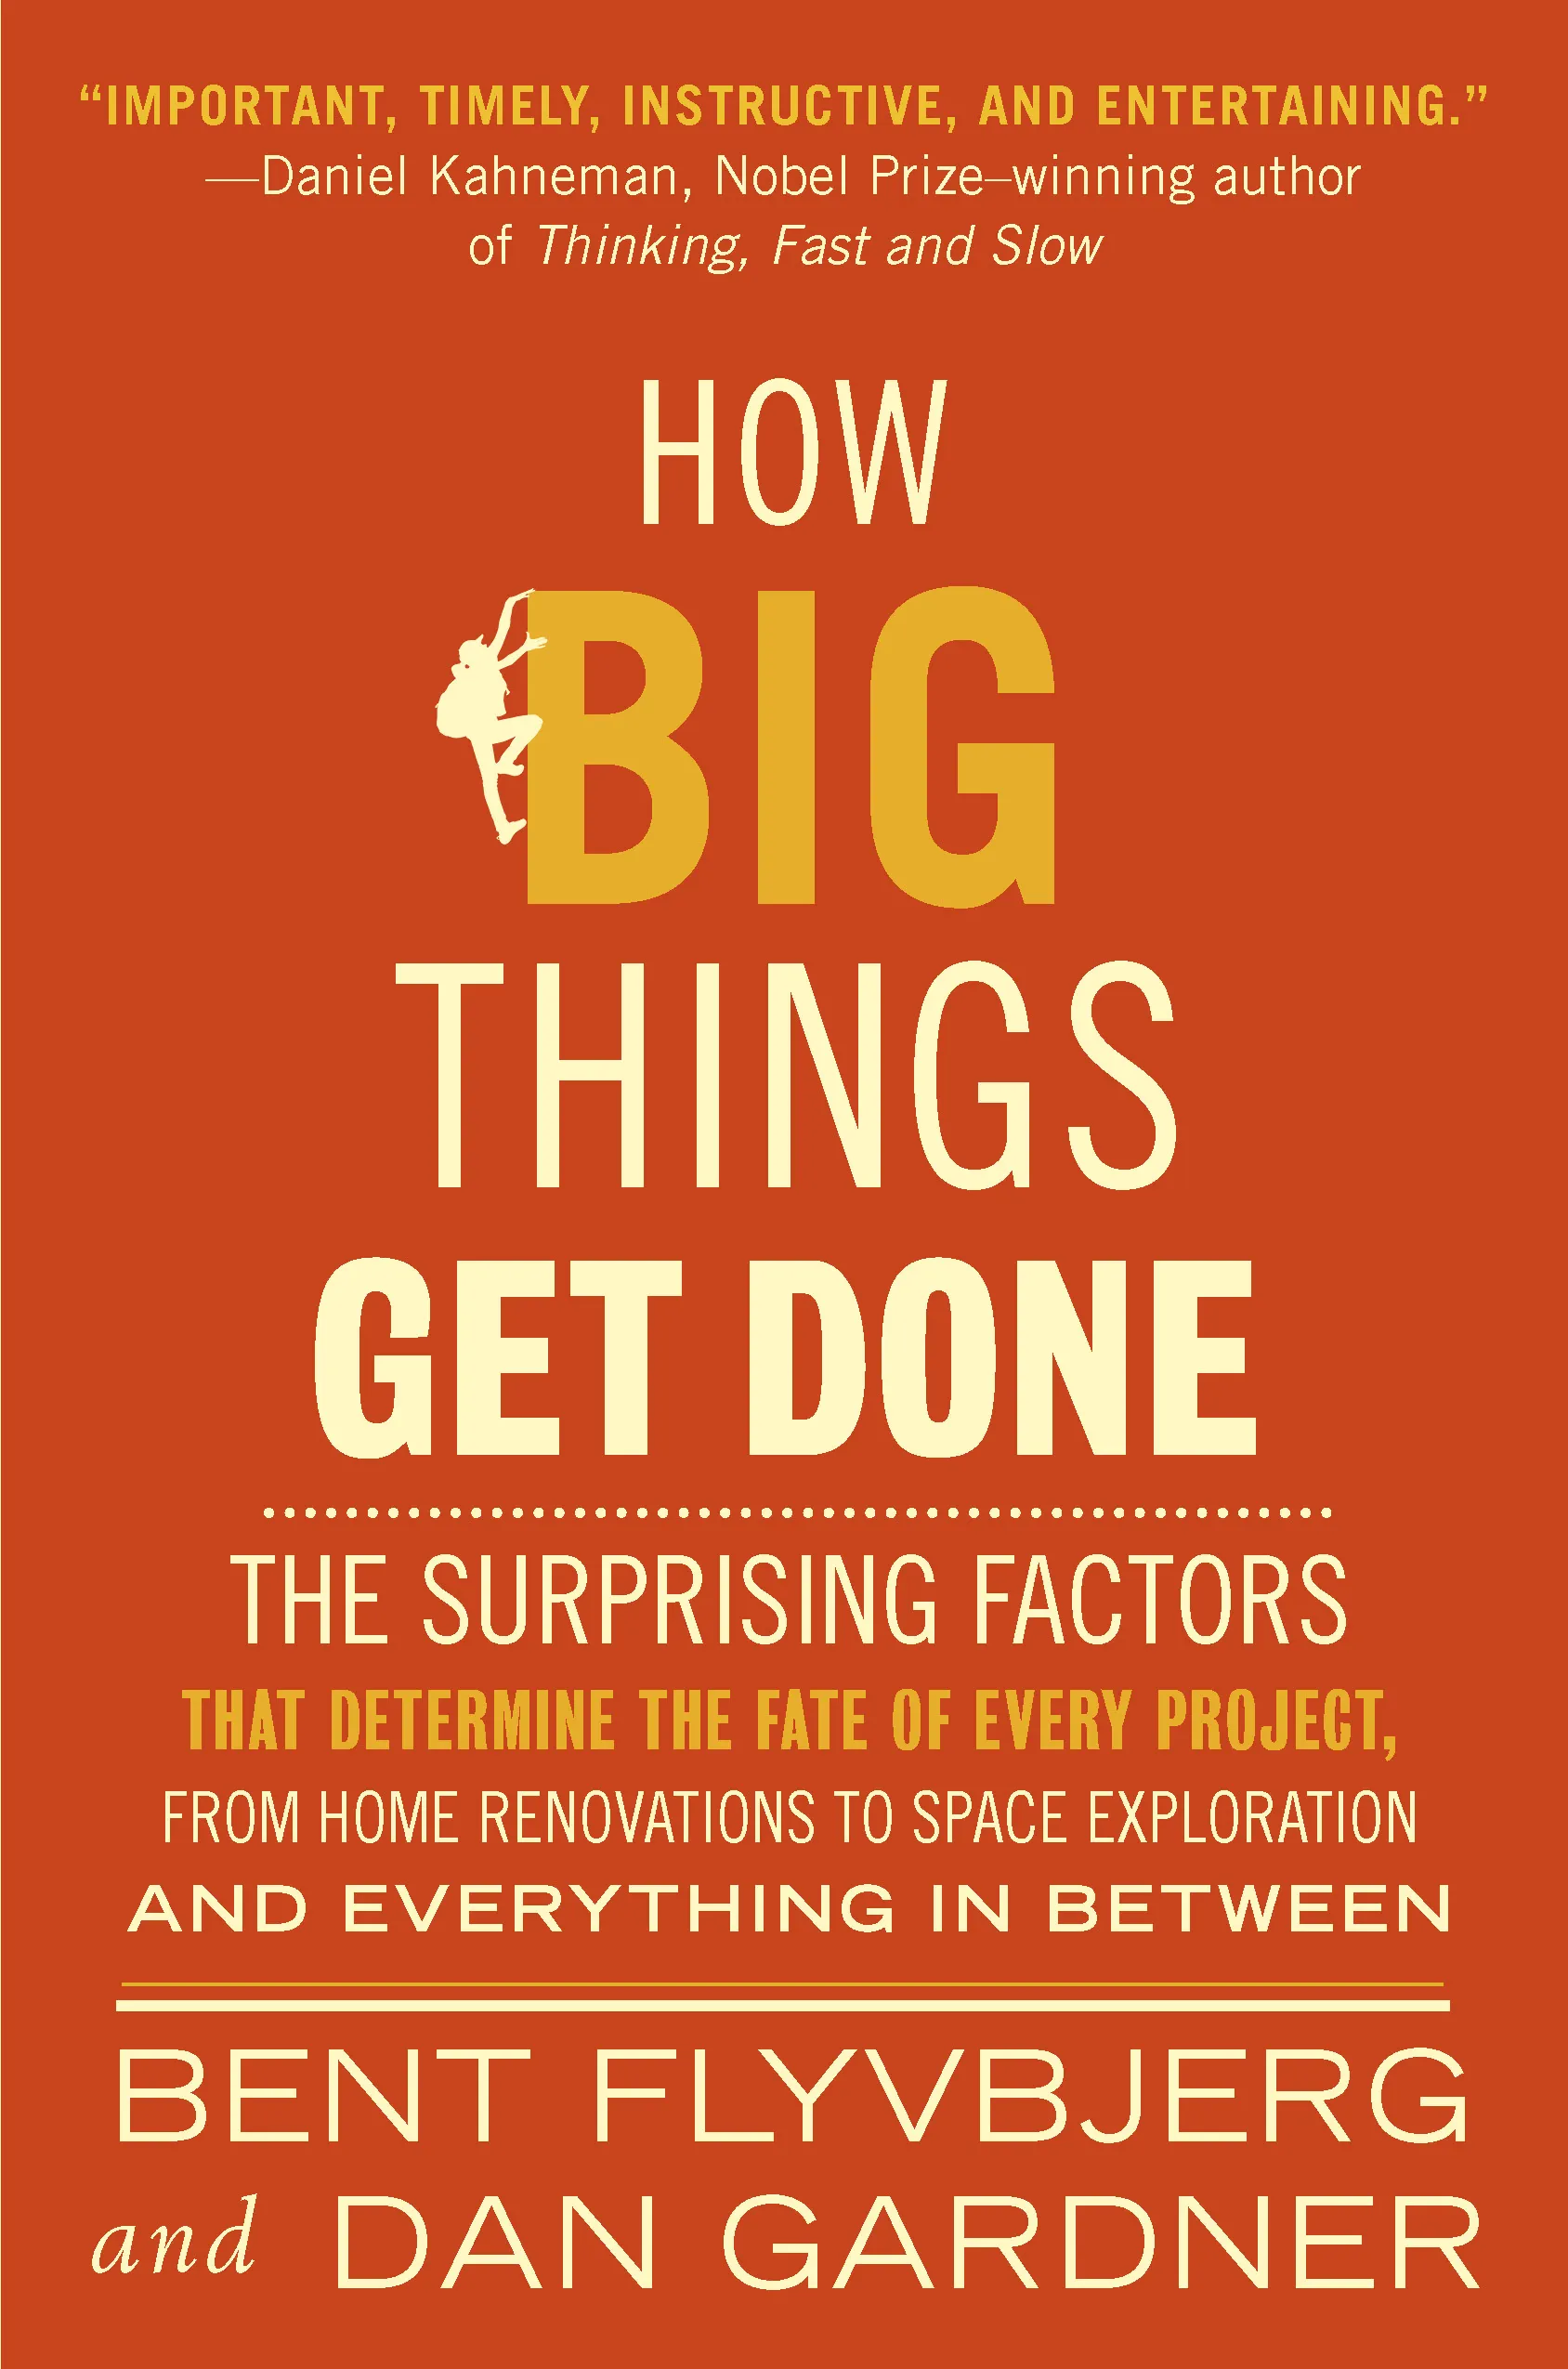 A cover image of the book titled How Big Things Get Done